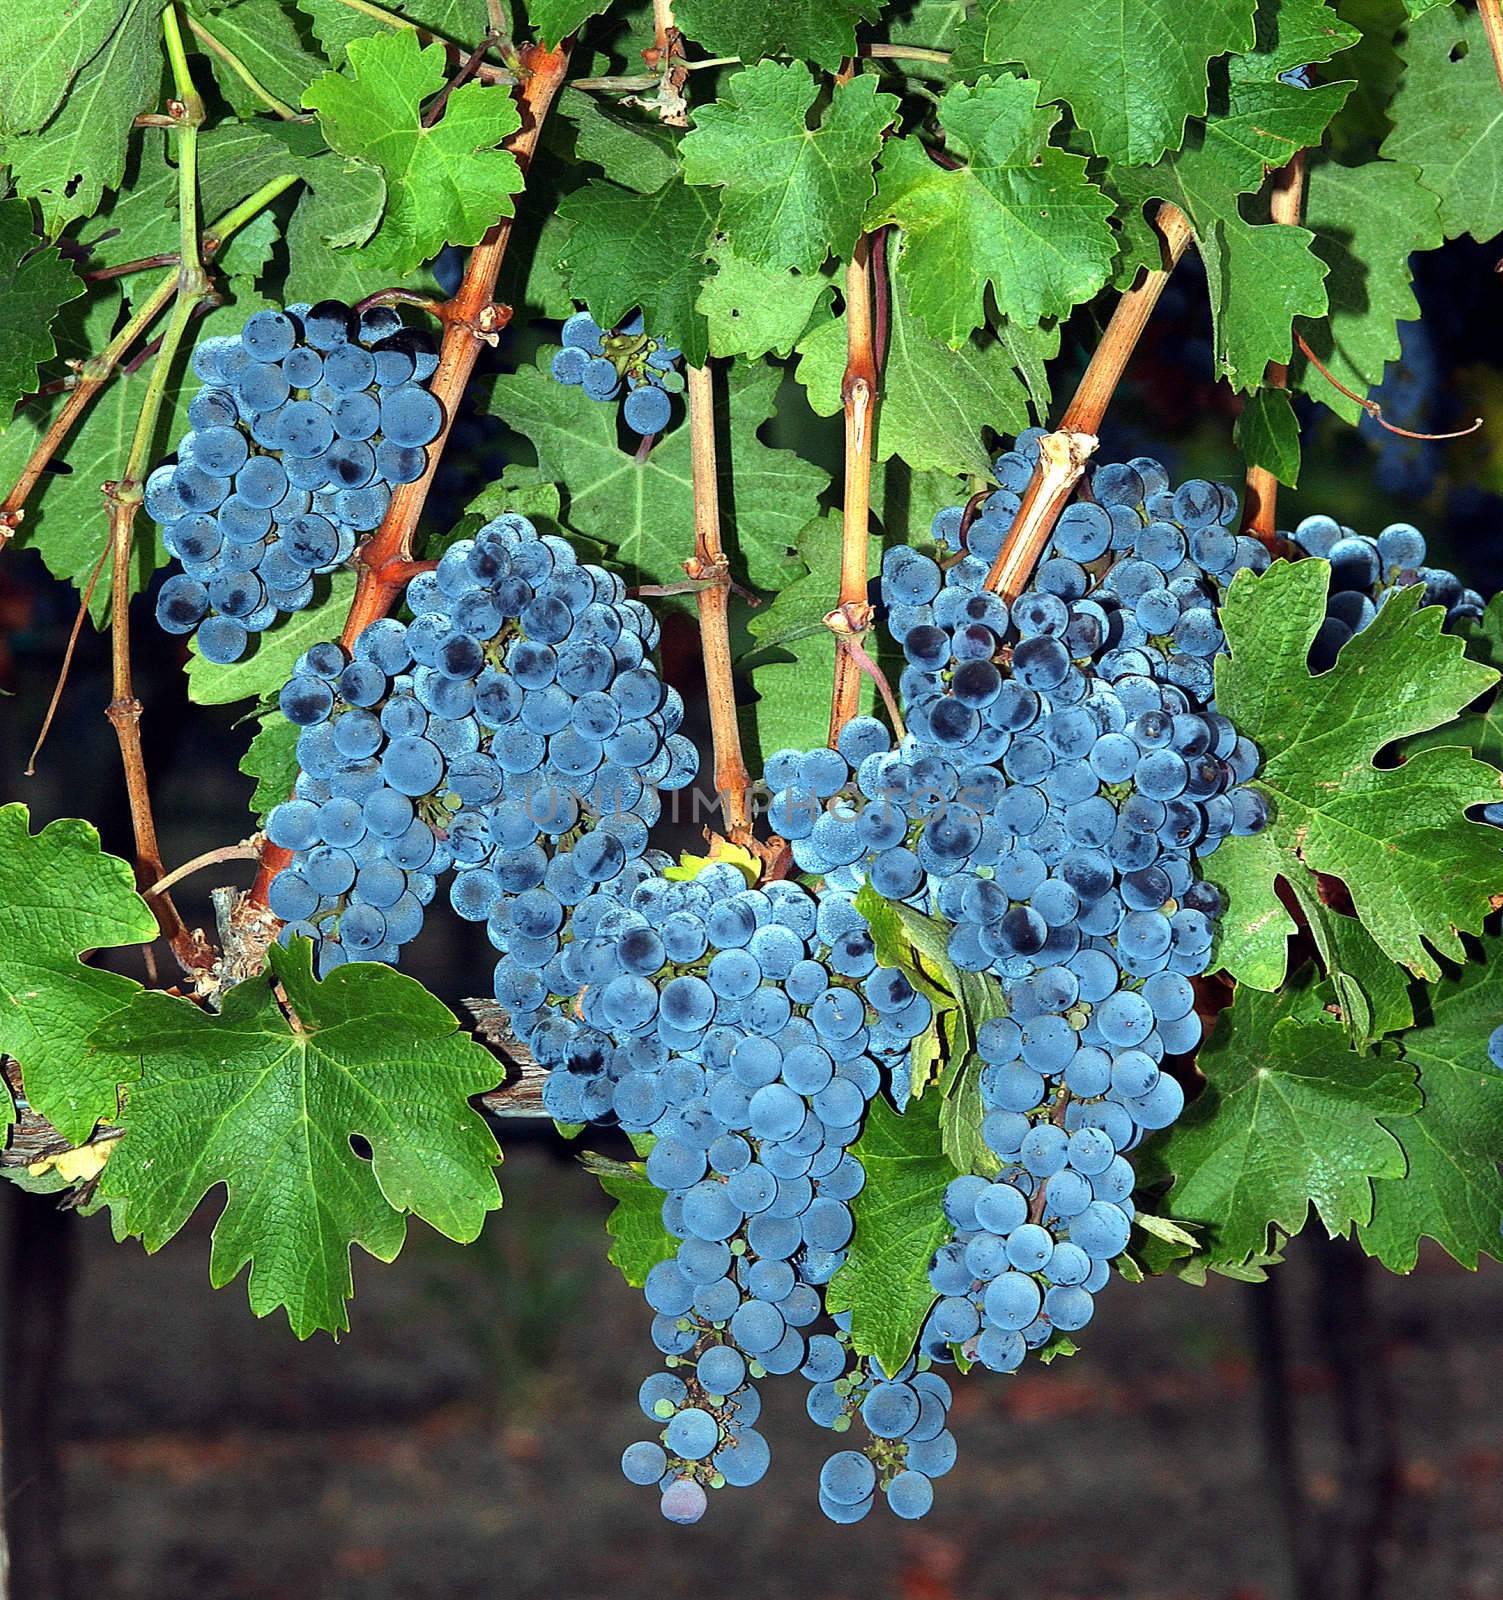 Grapes at the Andretti Winery ready for harvest